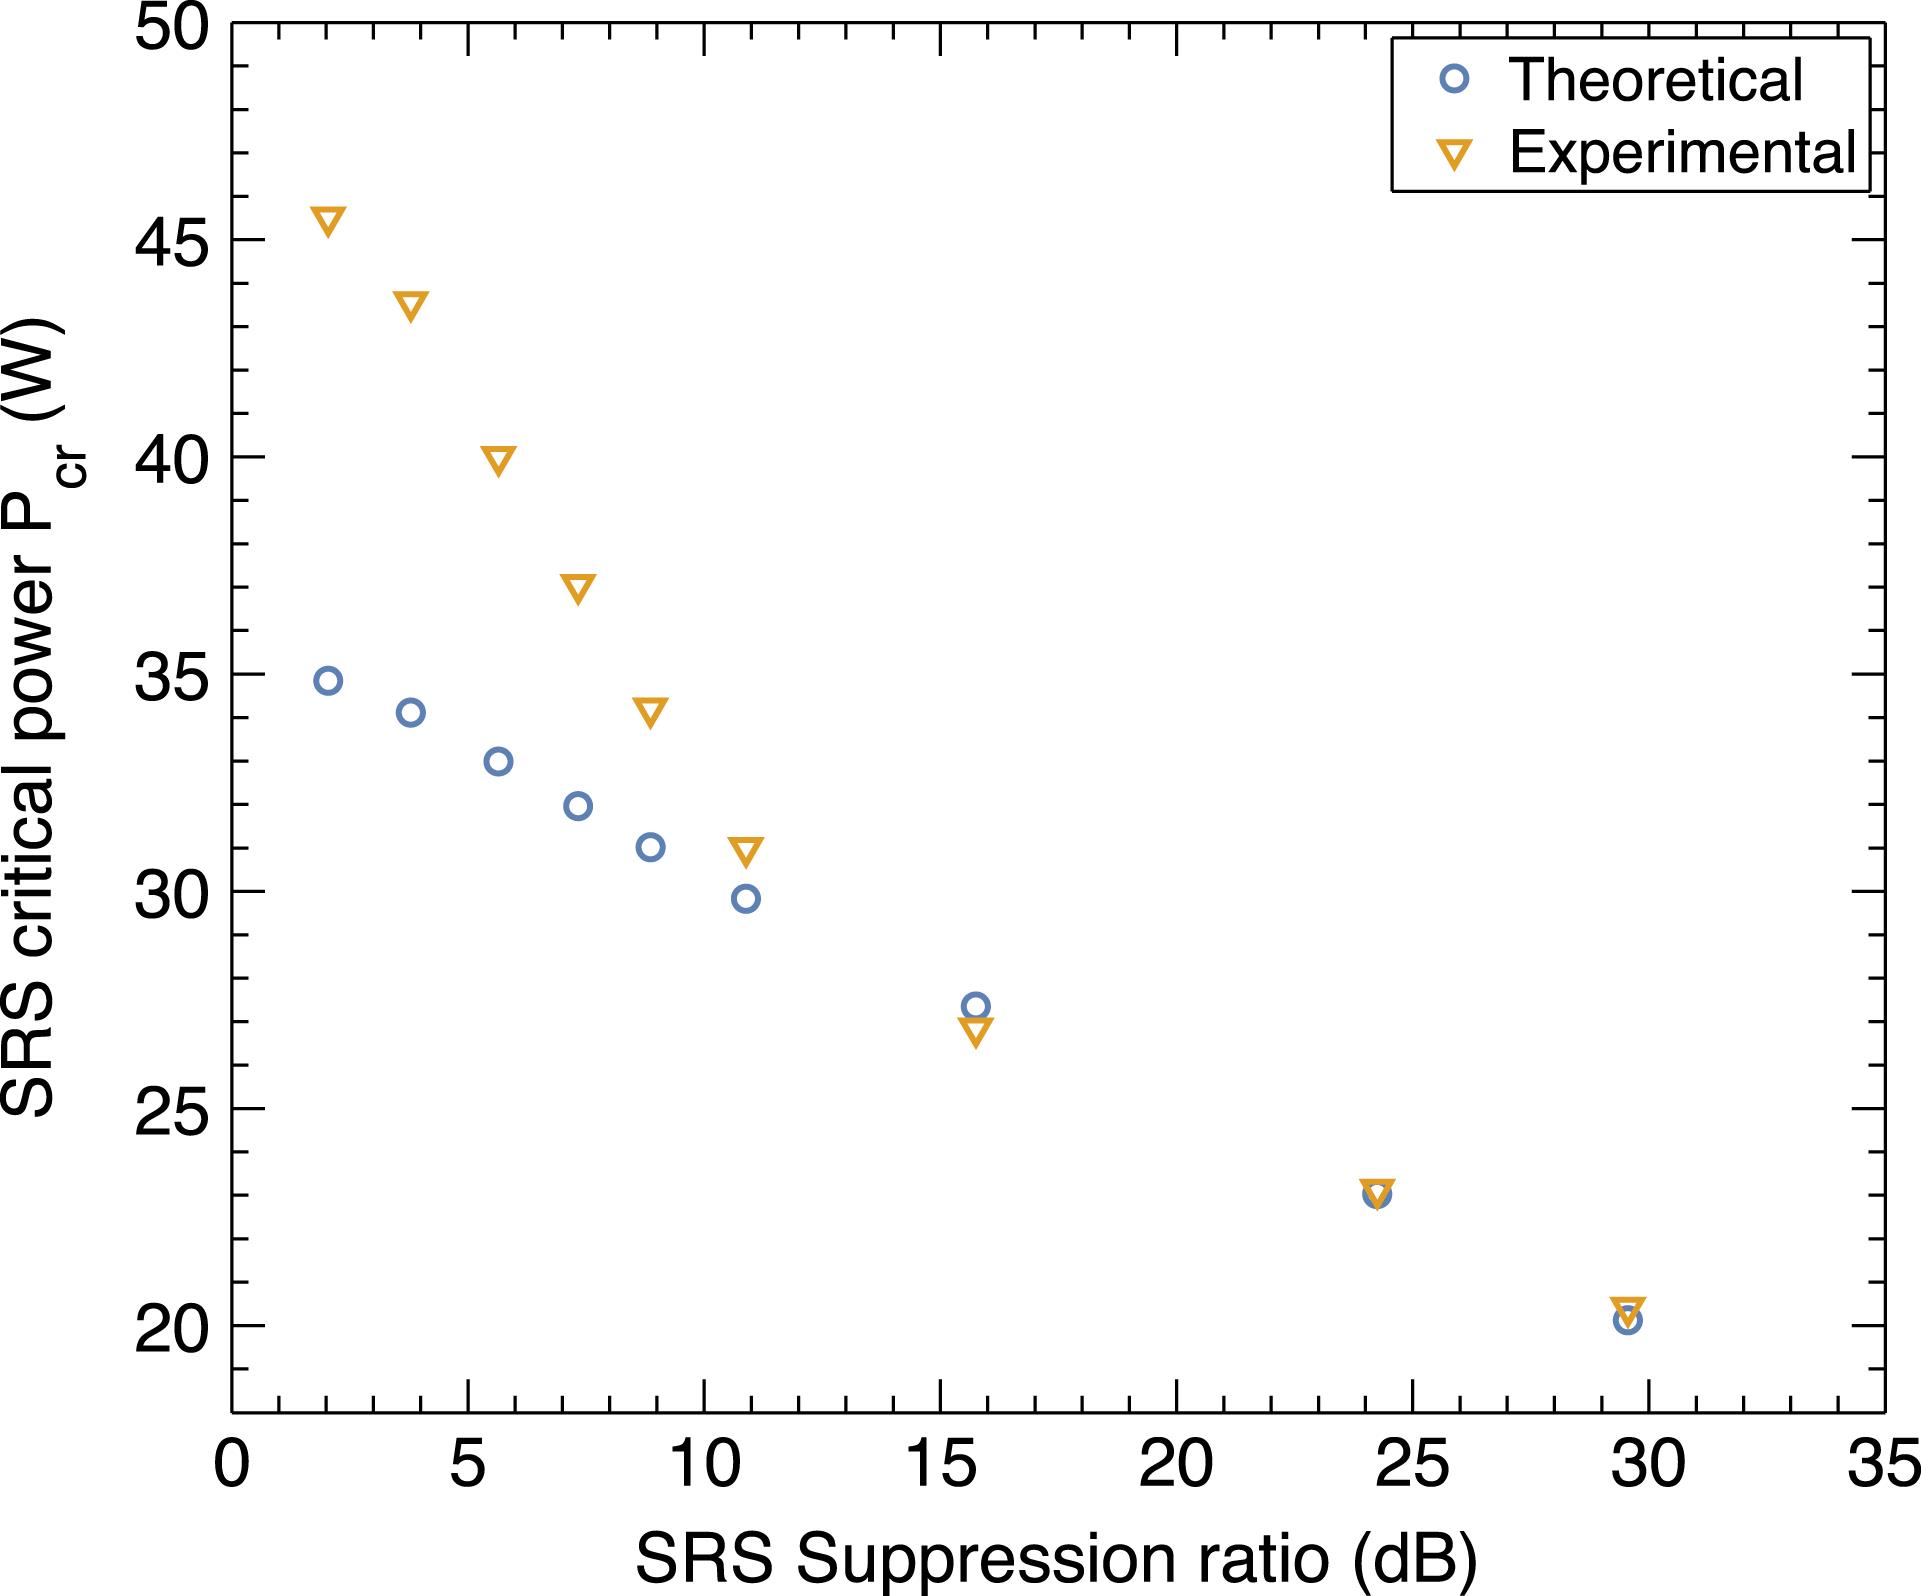 The SRS thresholds in experiments and prediction.